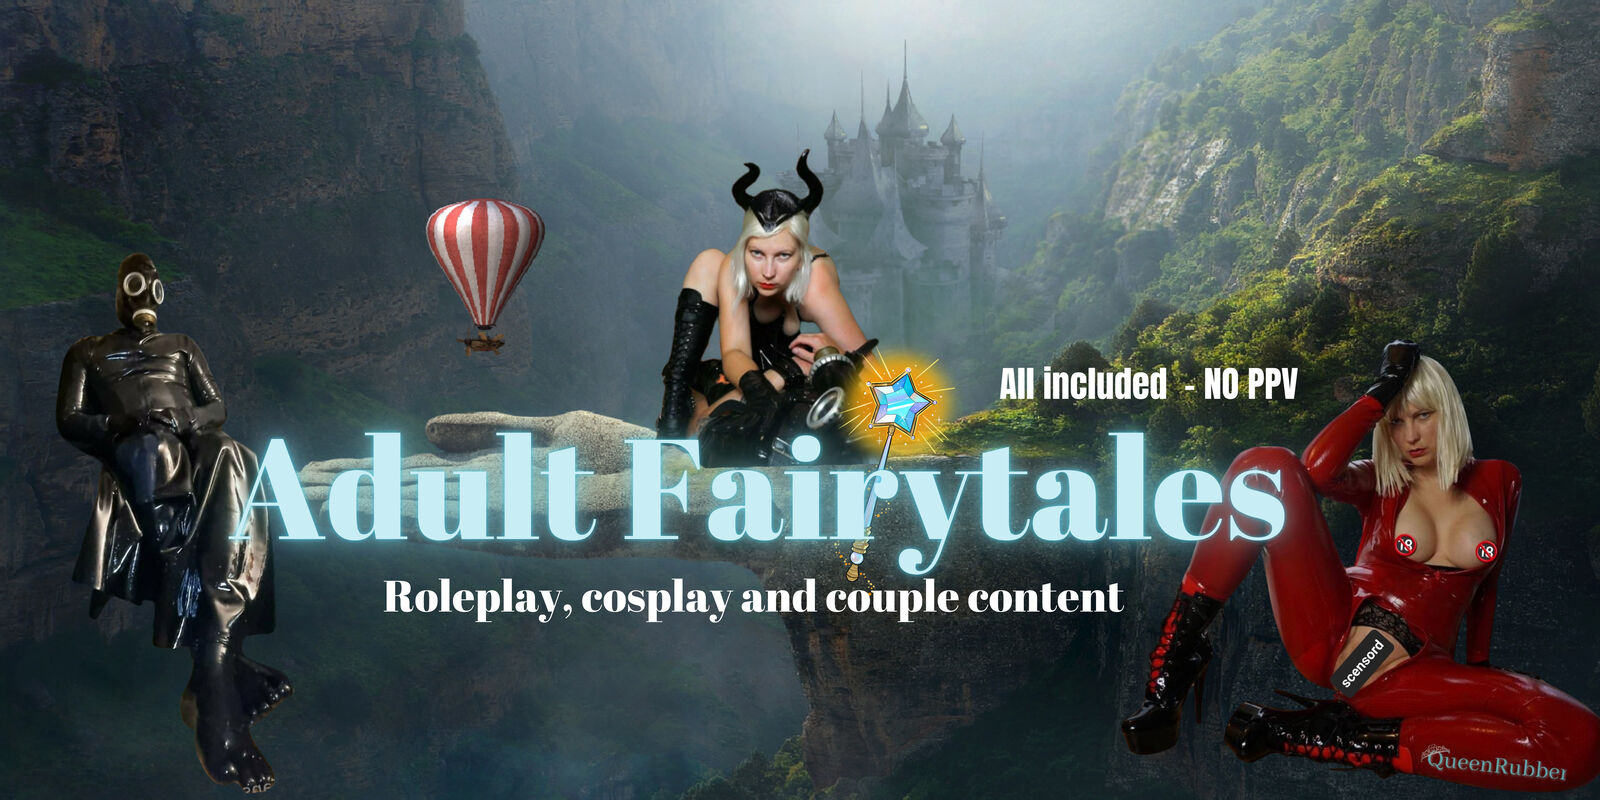 See Adult Fairytales (no ppv) profile